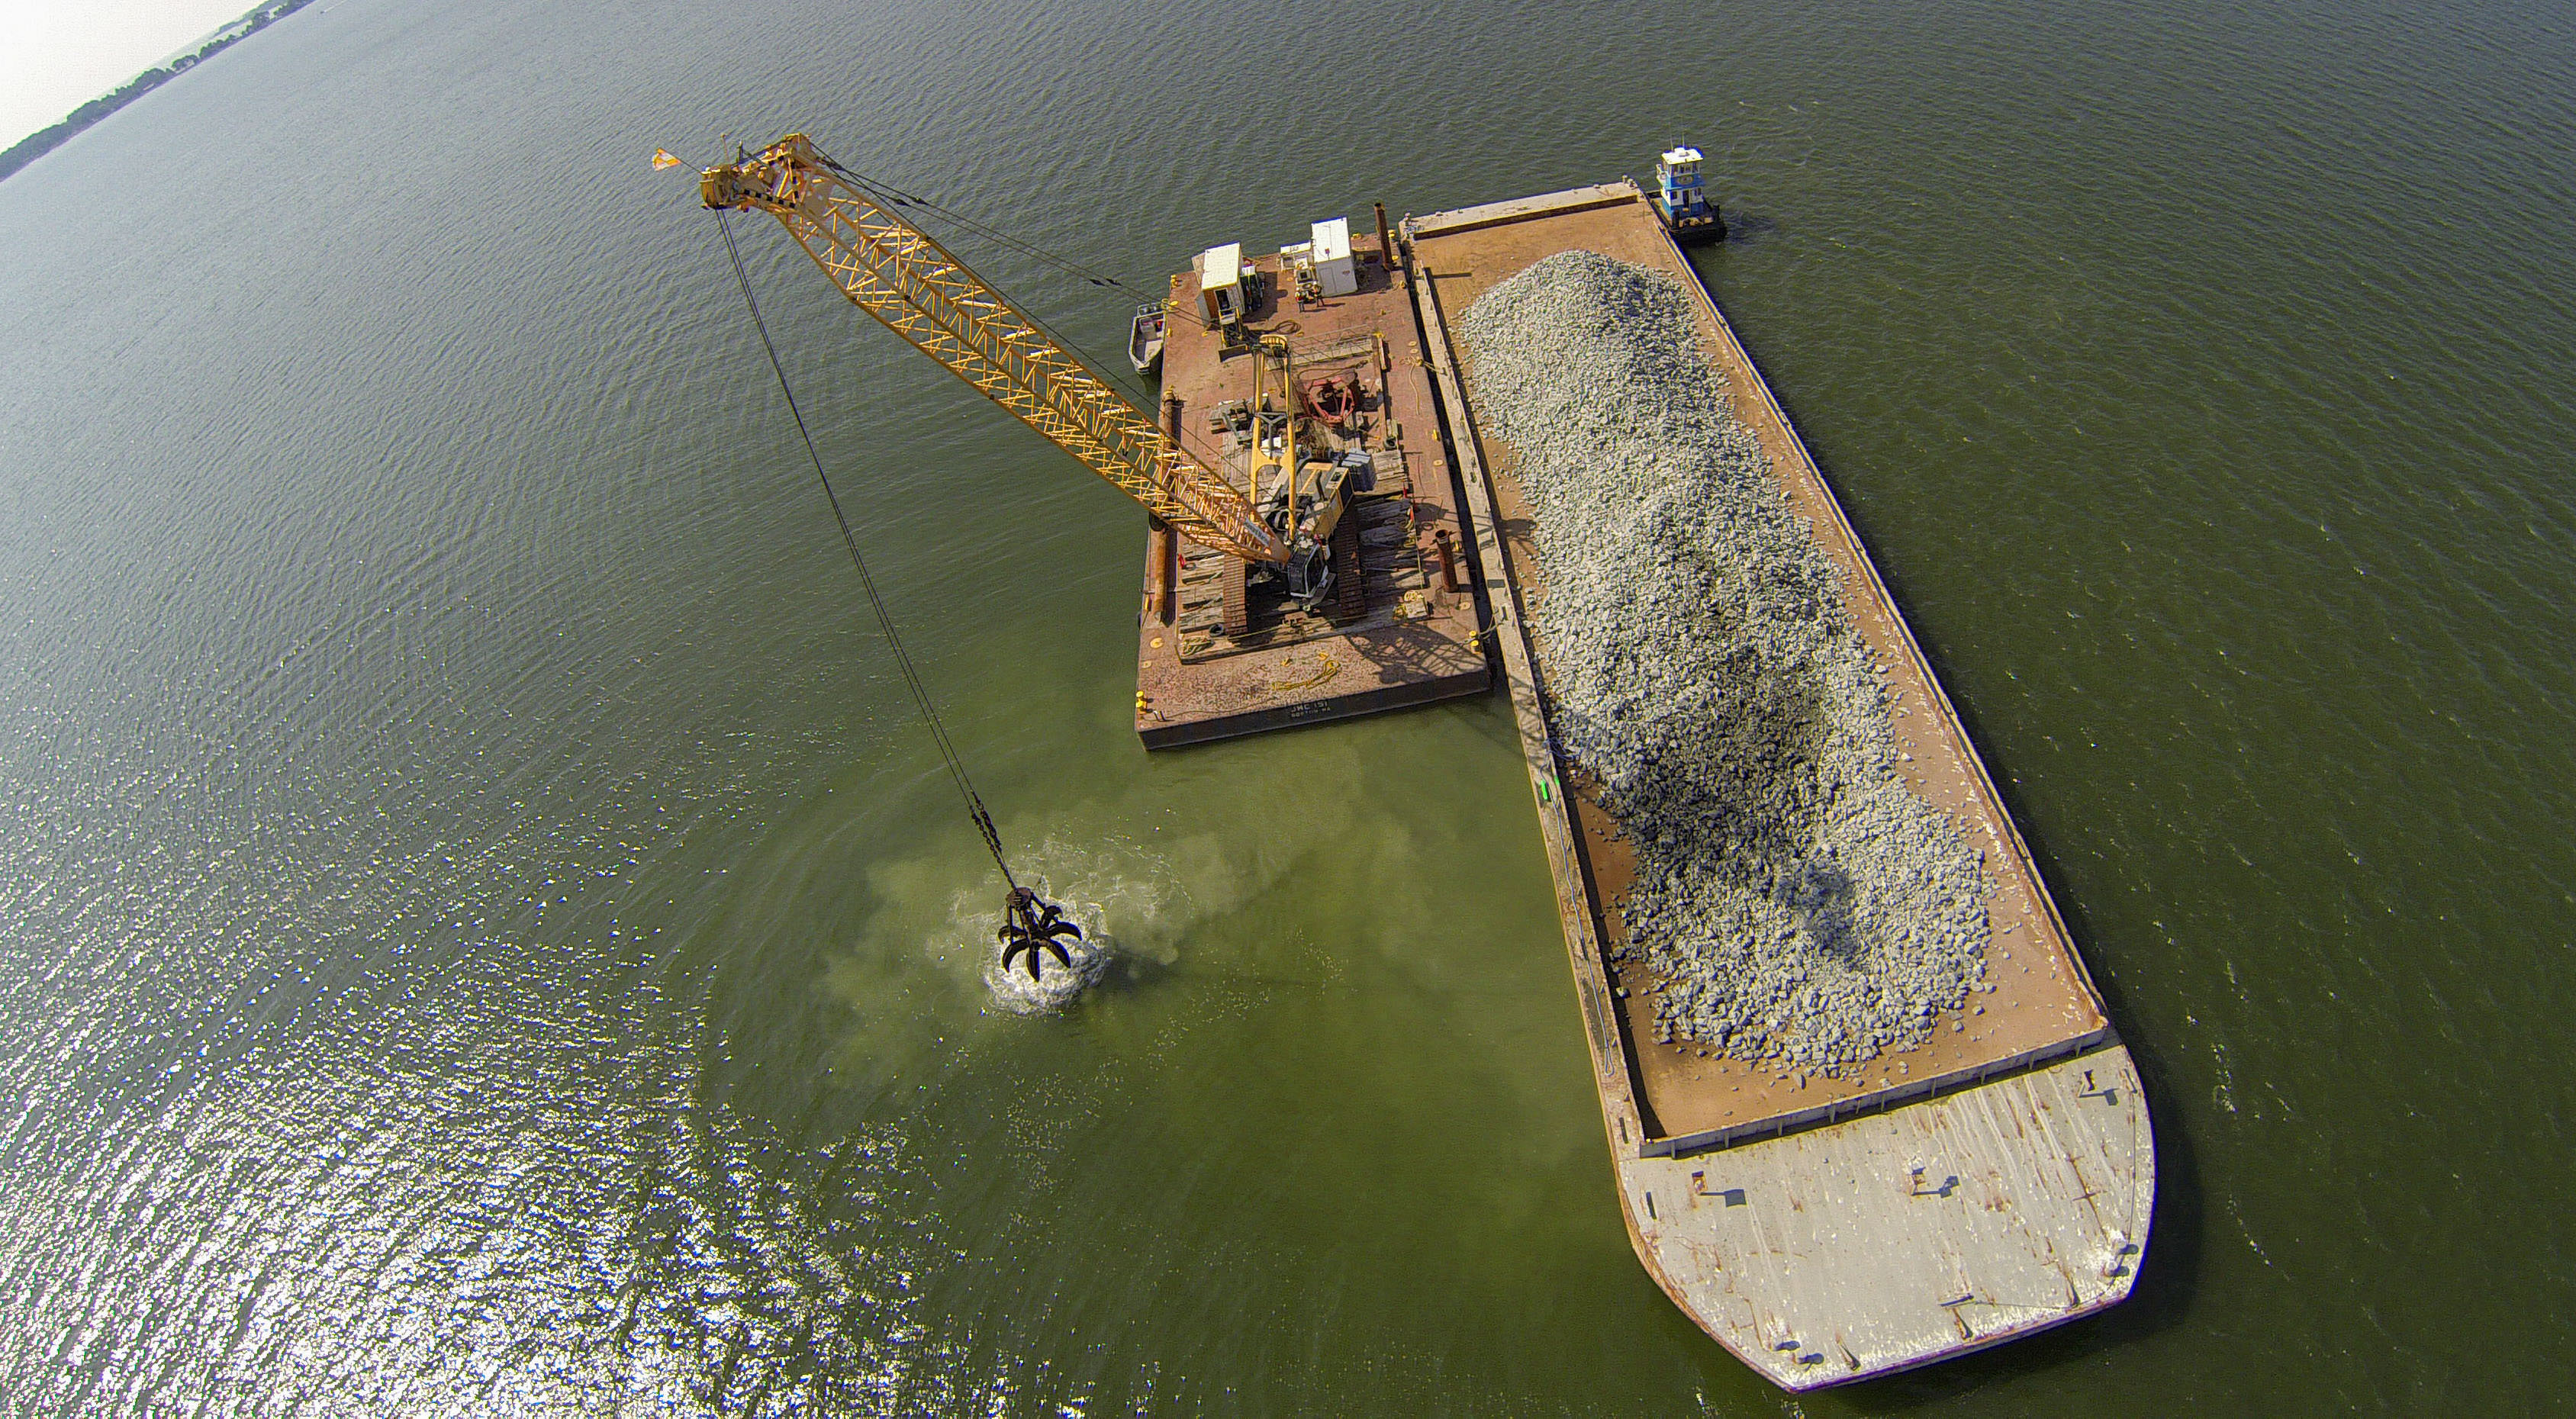 Aerial view looking down on a floating barge carrying crushed blocks of concrete. The grabber claw of a crane floating next to the barge dumps a load of concrete into the water.